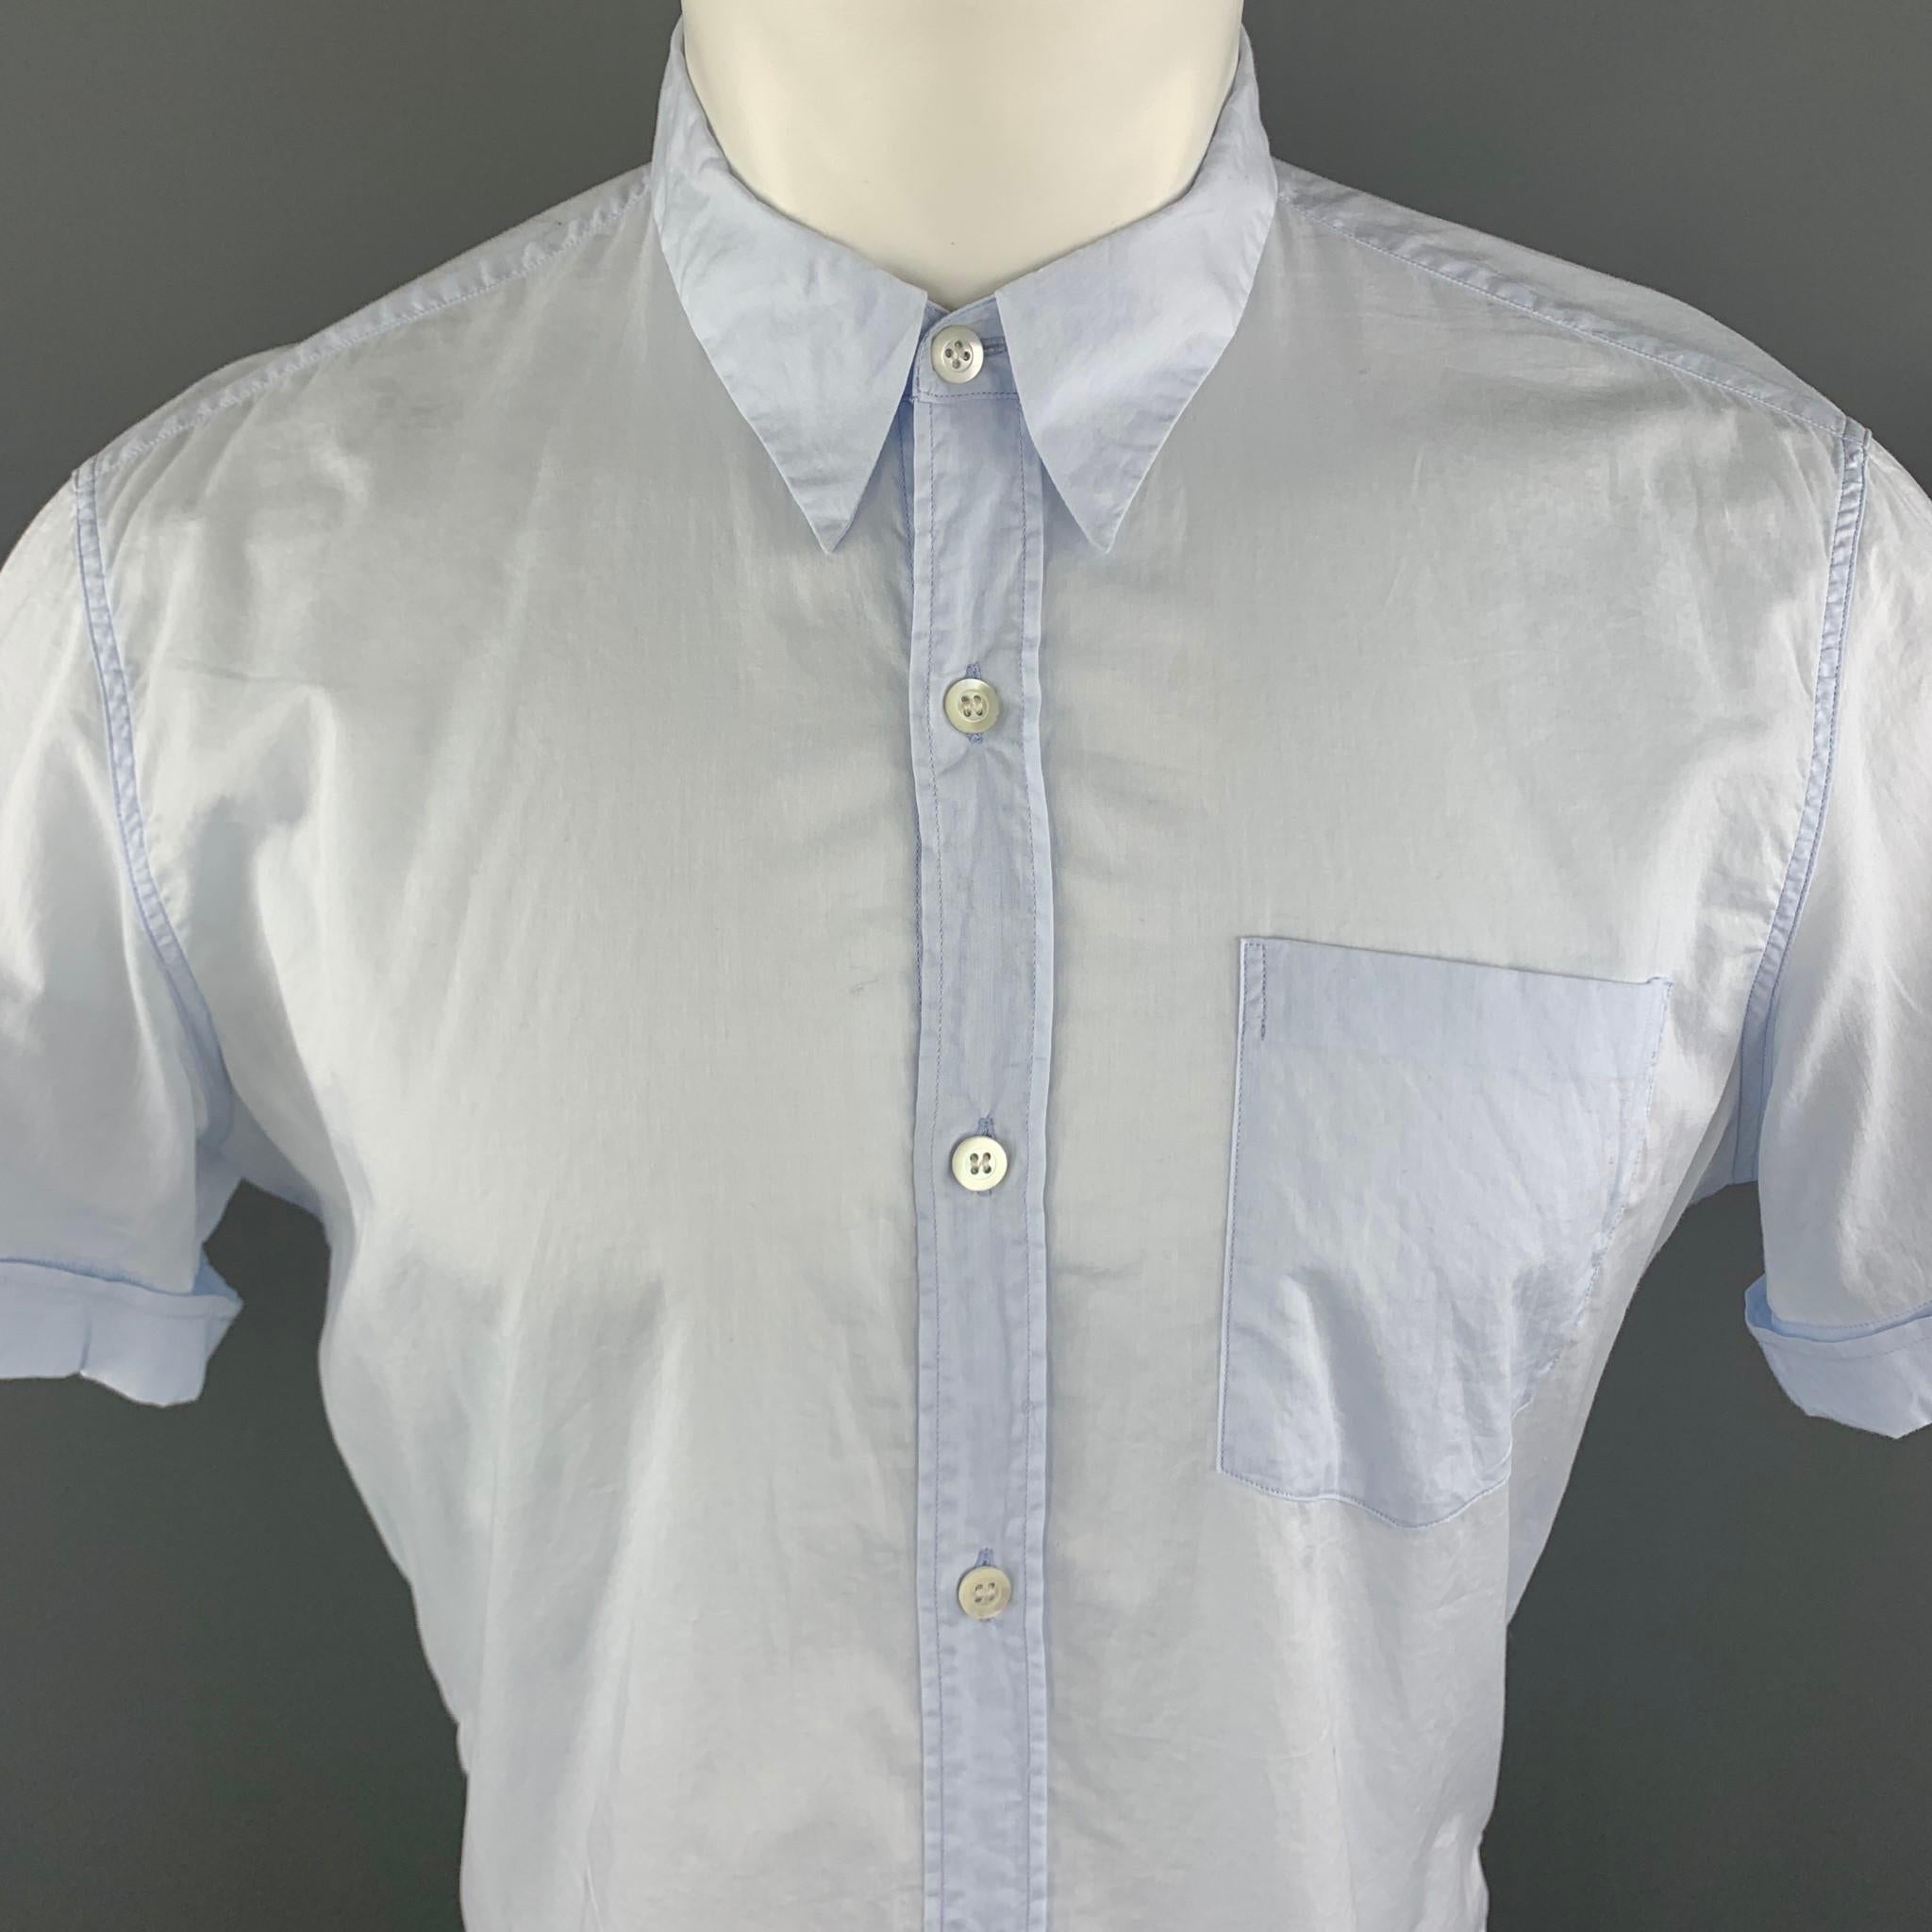 DRIES VAN NOTEN short sleeve shirt comes in a solid light blue cotton material, with a pointed collar, a patch pocket, cuffed sleeves, button up.

Excellent Pre-Owned Condition.
Marked: IT 50

Measurements:

Shoulder: 17 in. 
Chest: 44 in. 
Sleeve: